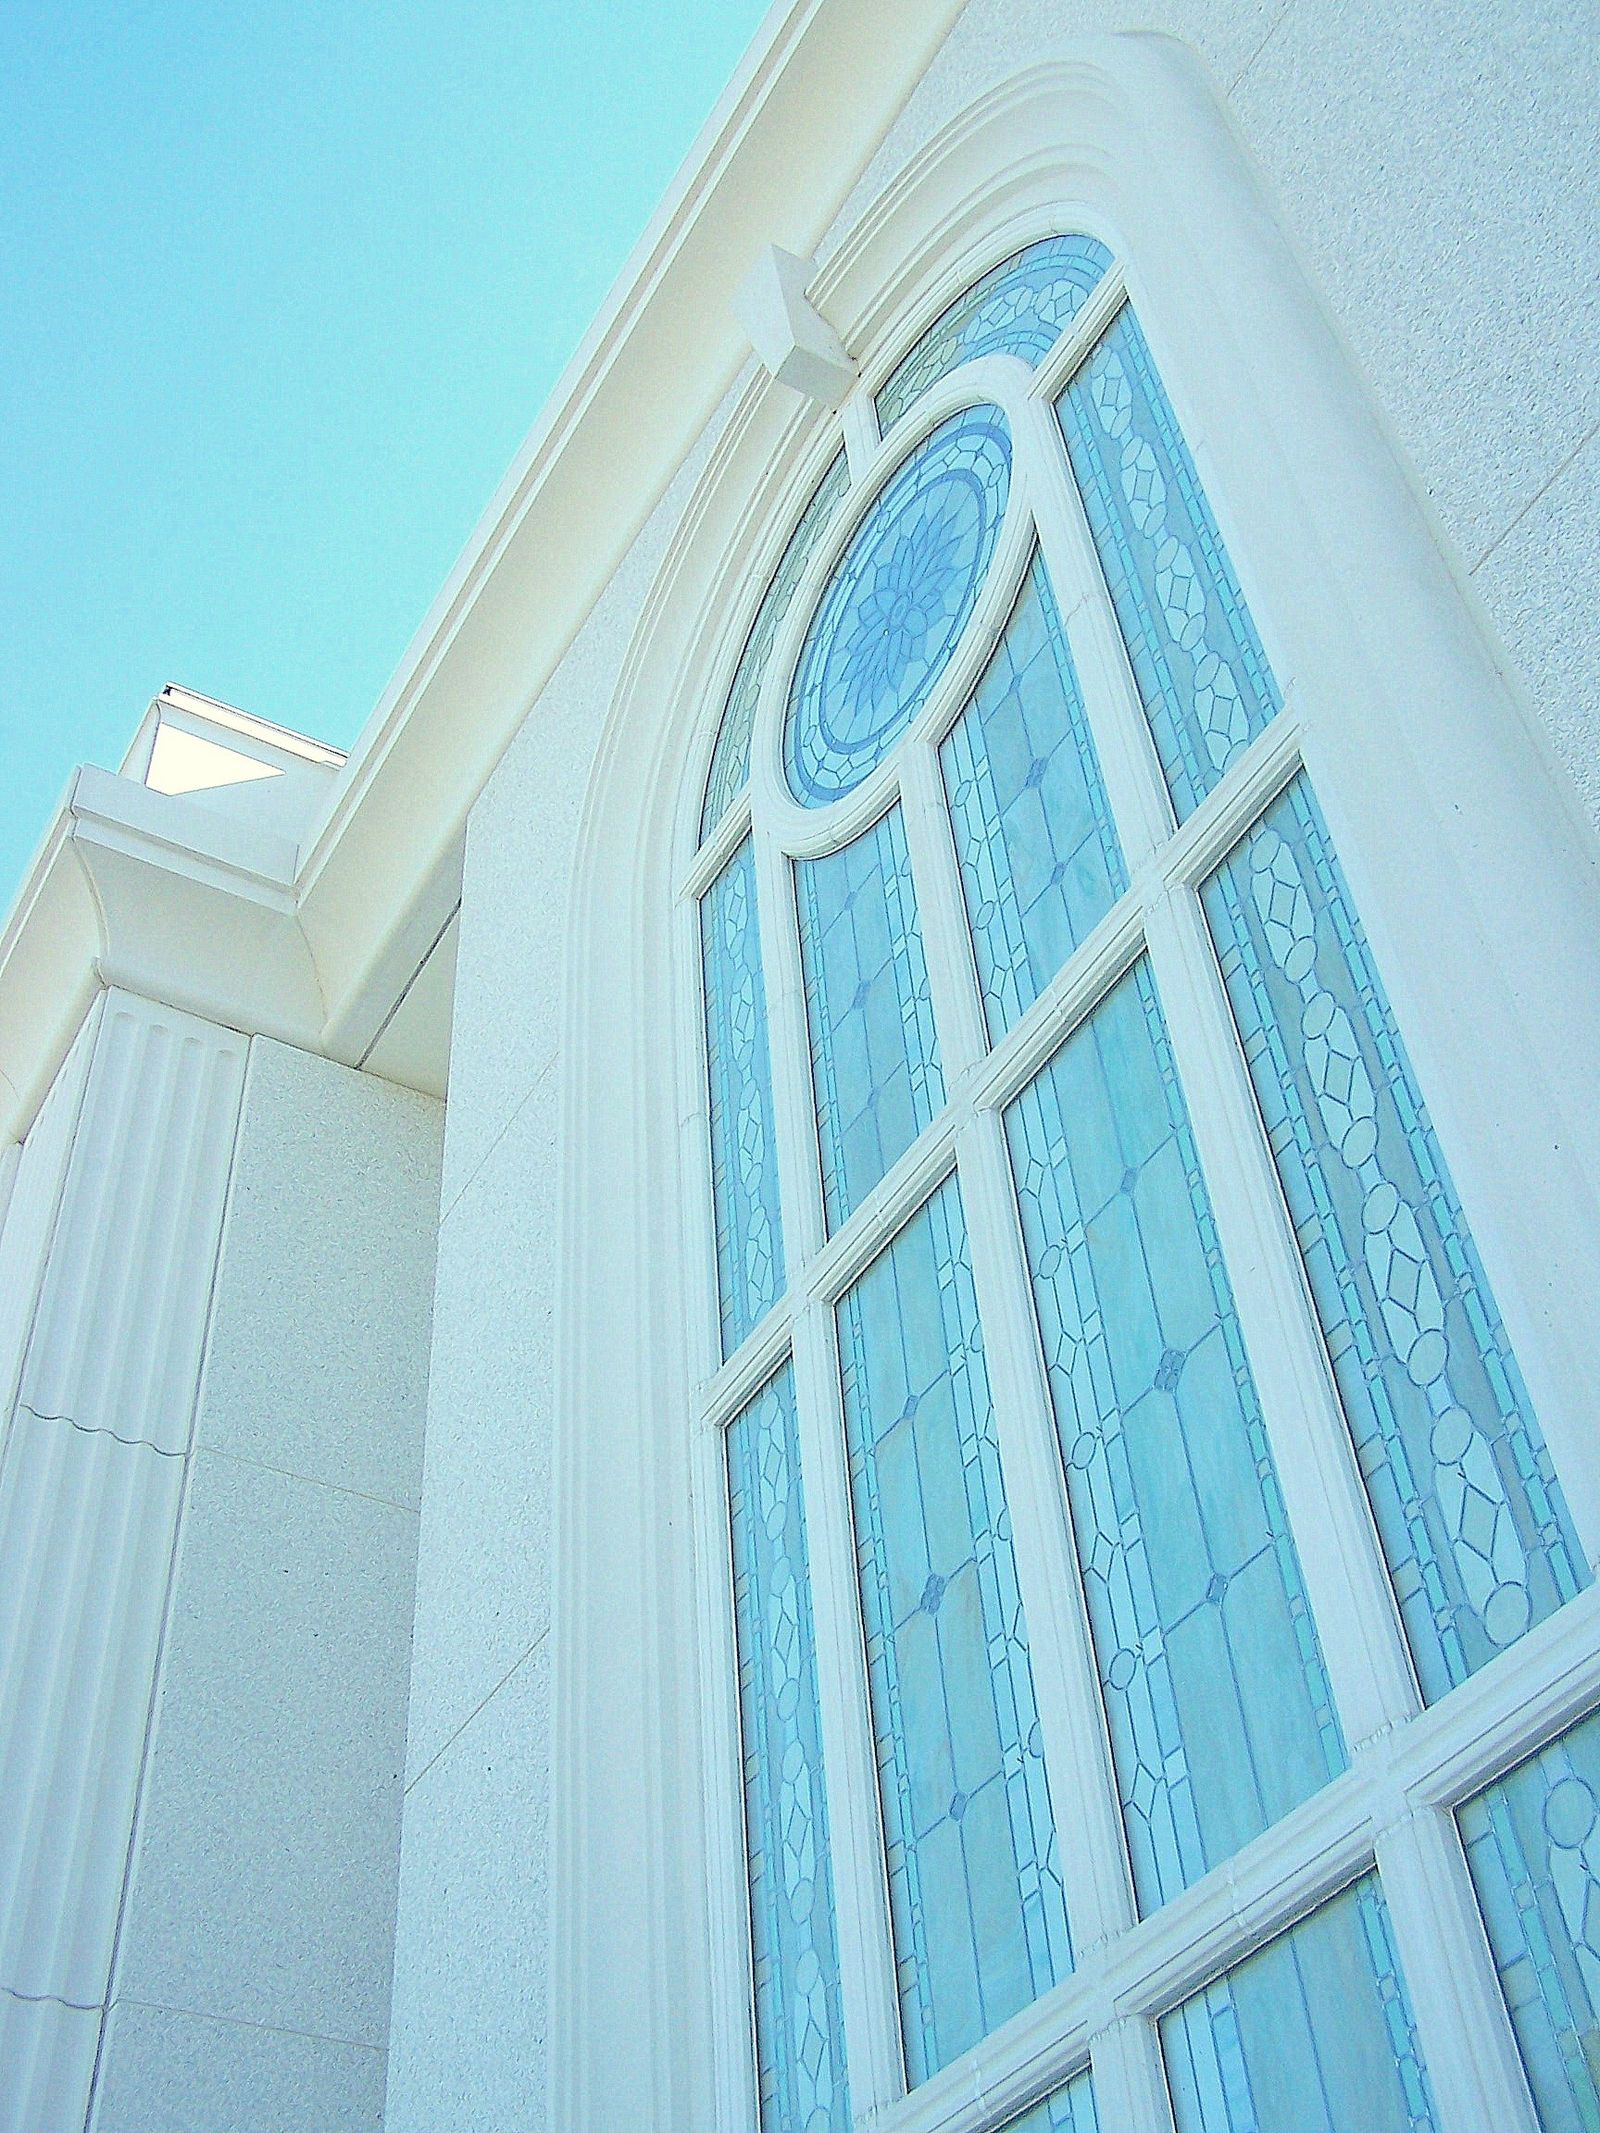 The Orlando Florida Temple window, including the exterior of the temple.